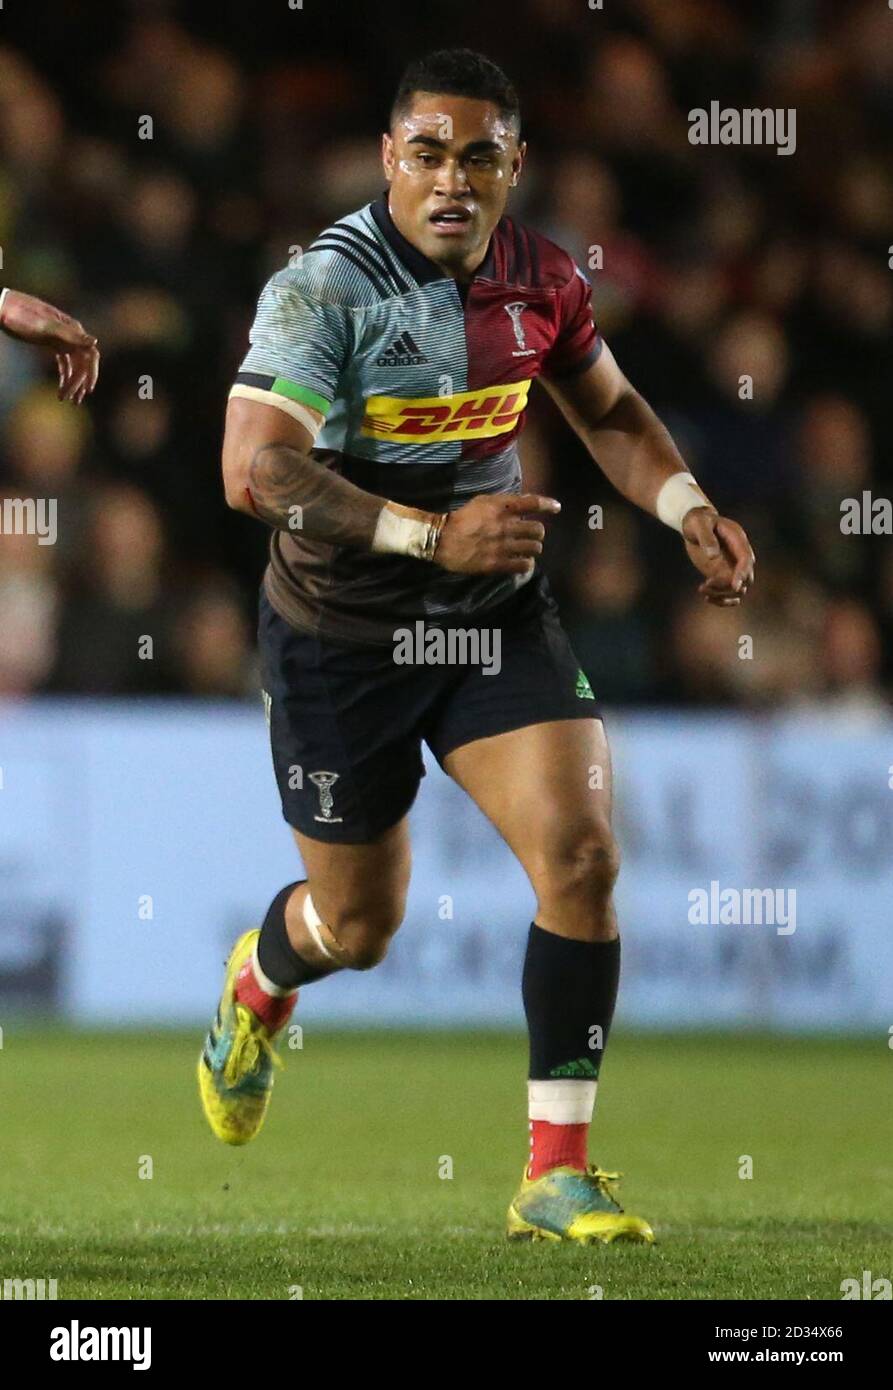 Harlequins Francis Saili in action during the Gallagher Premiership Stock Photo